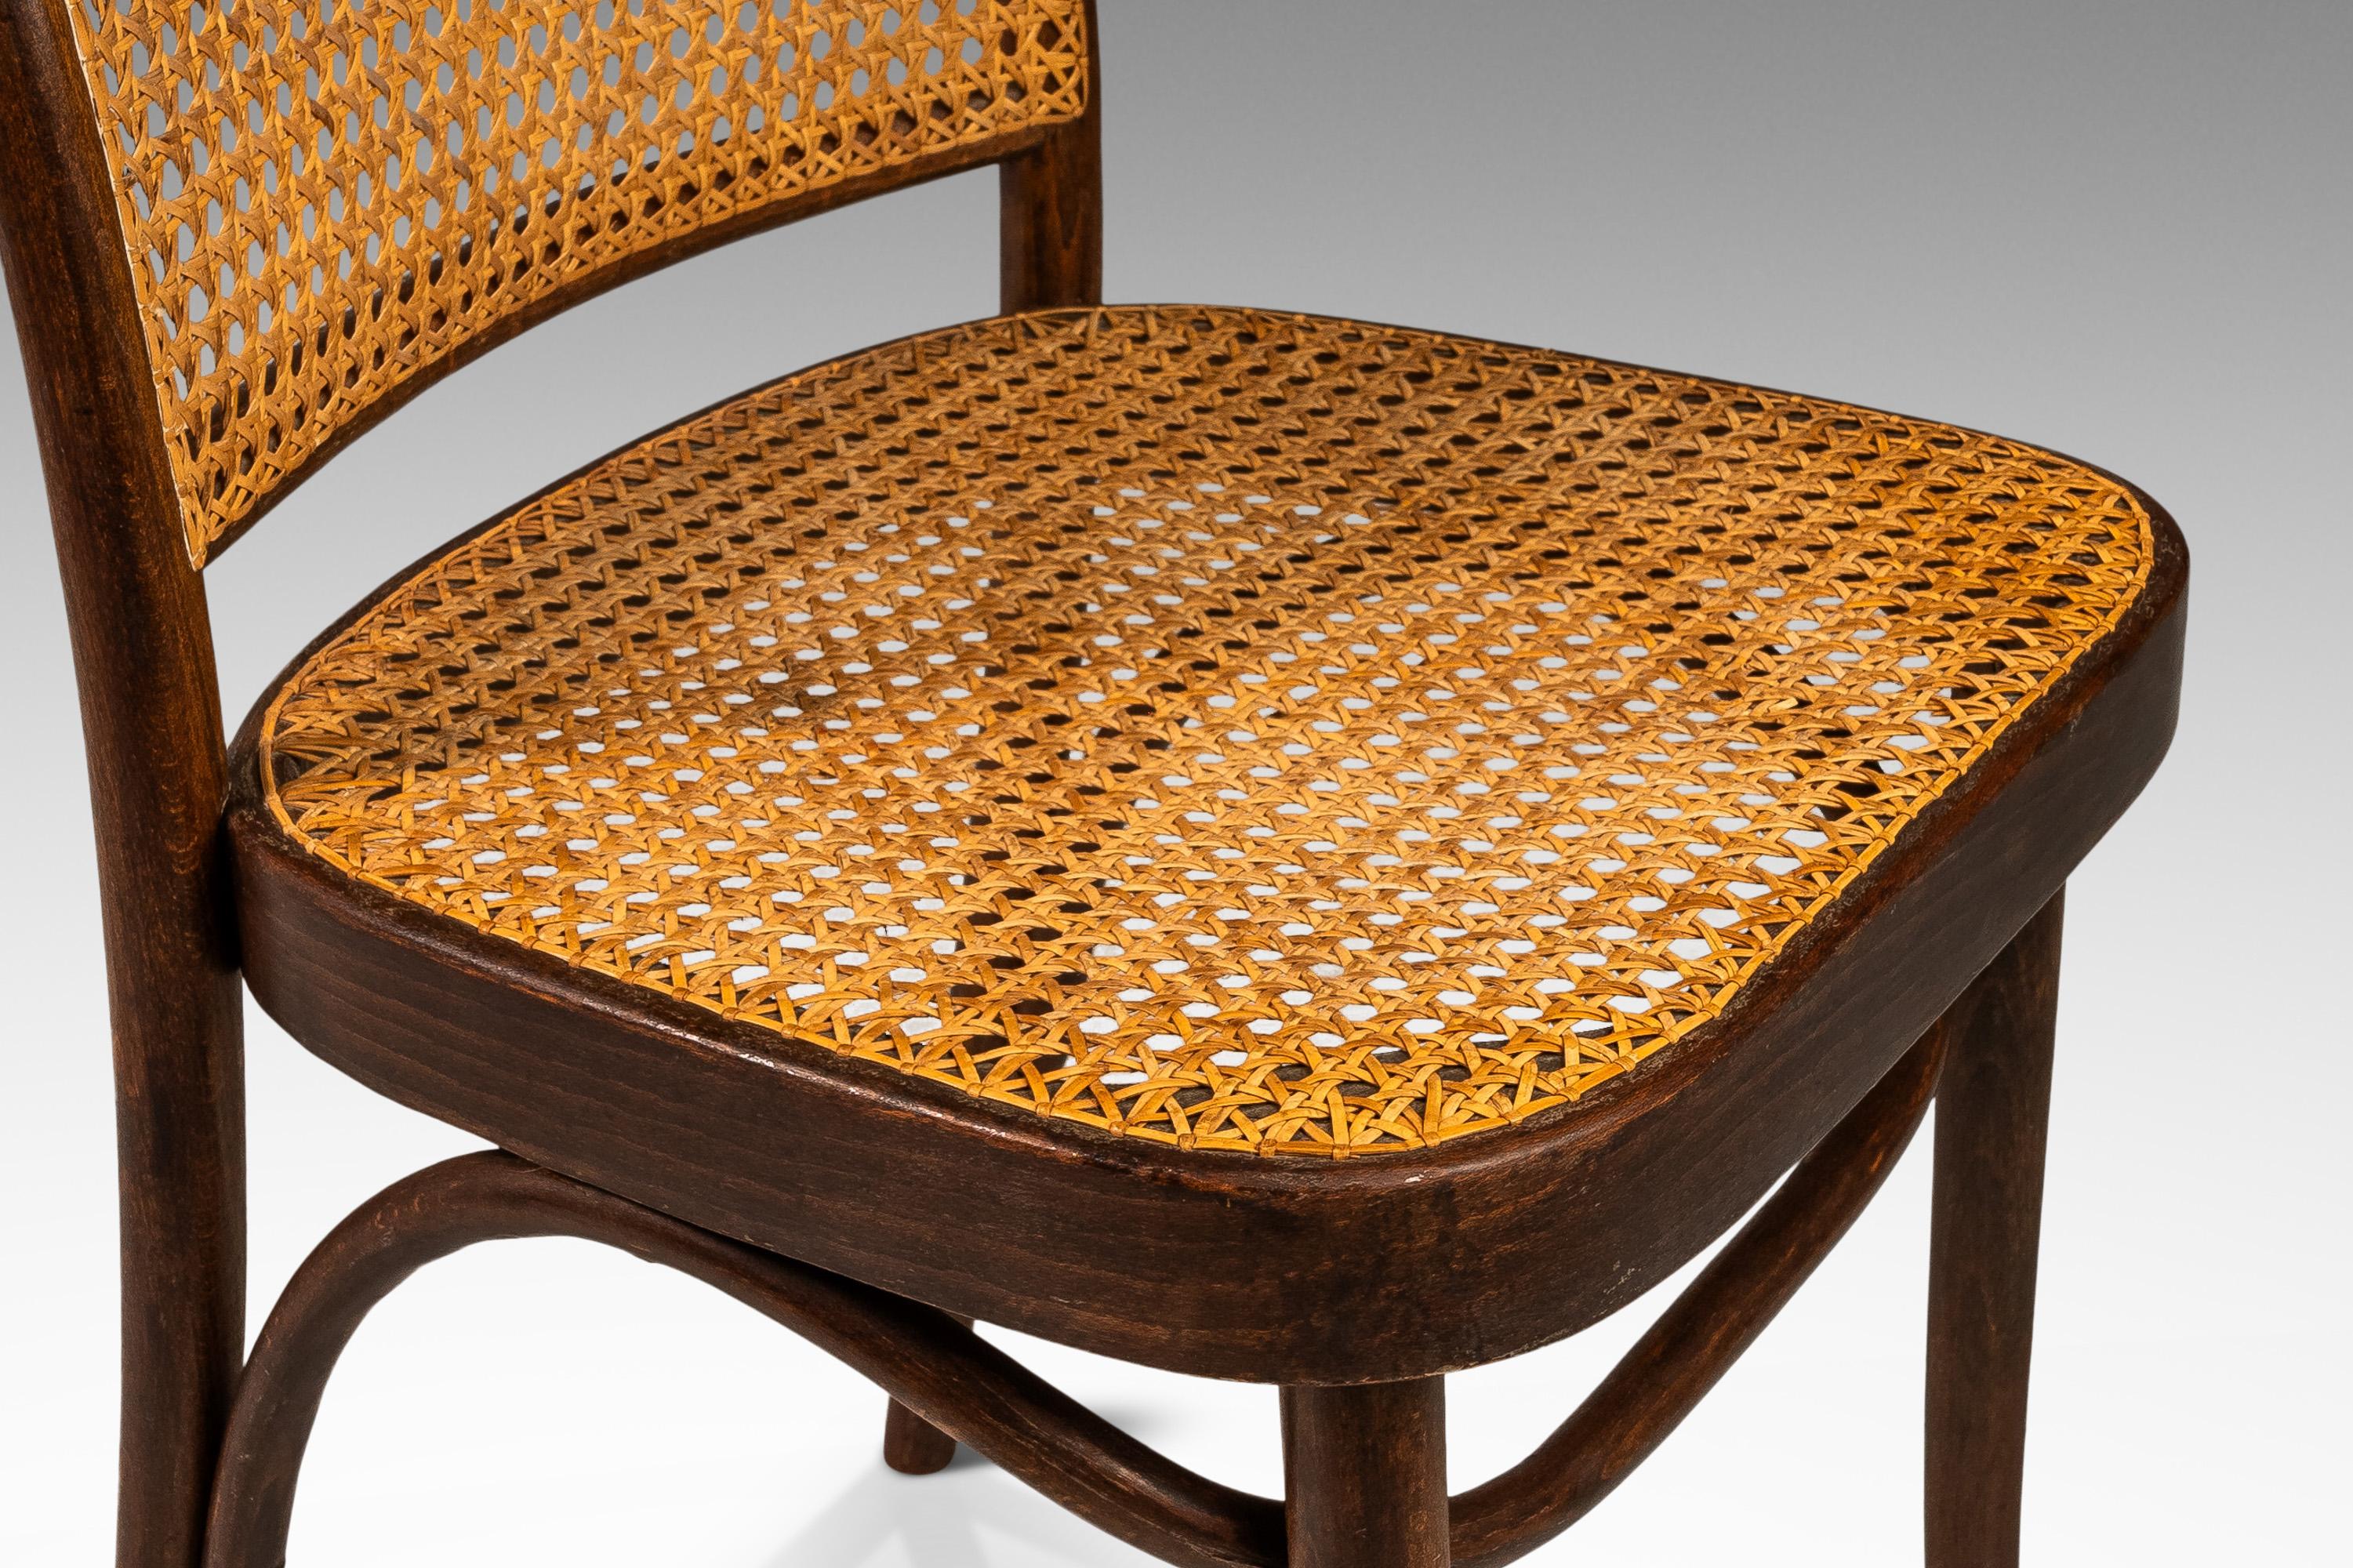 Bentwood Prague Model 811 Chair in Walnut by Josef Frank, Poland, c. 1960s For Sale 7